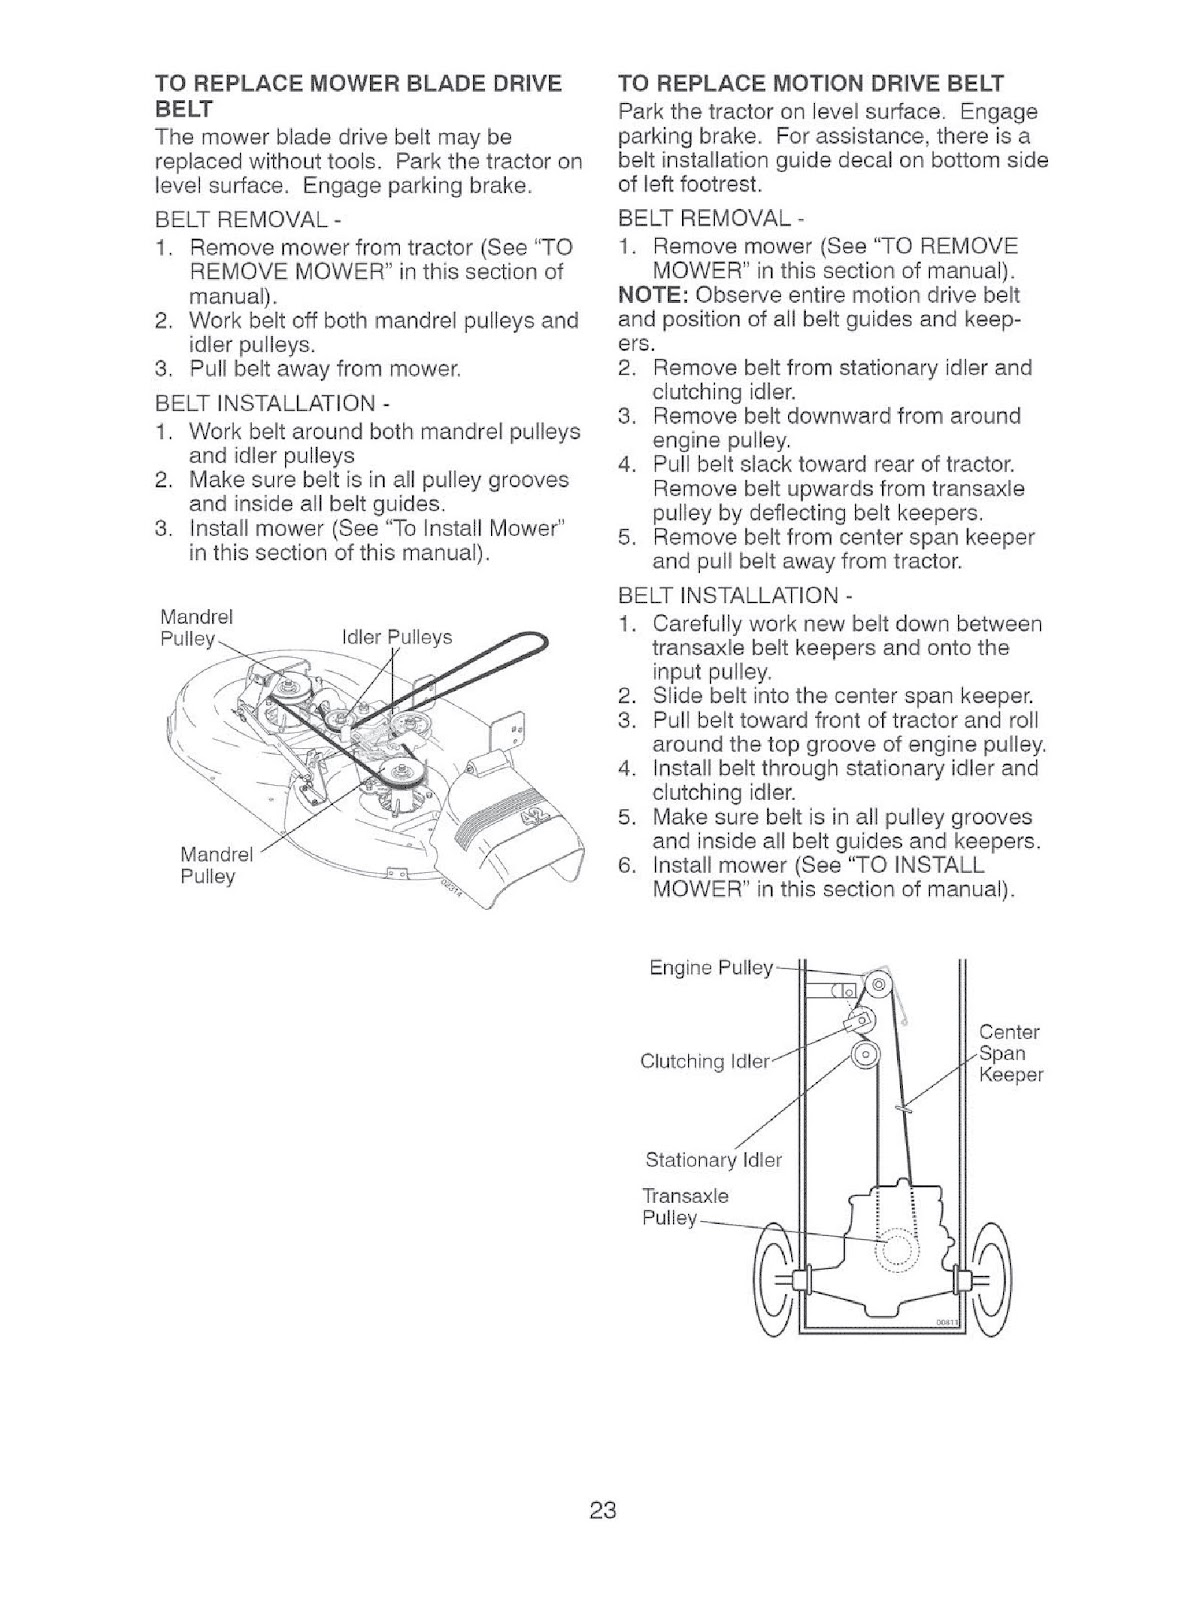 how to replace craftsman mower drive belt